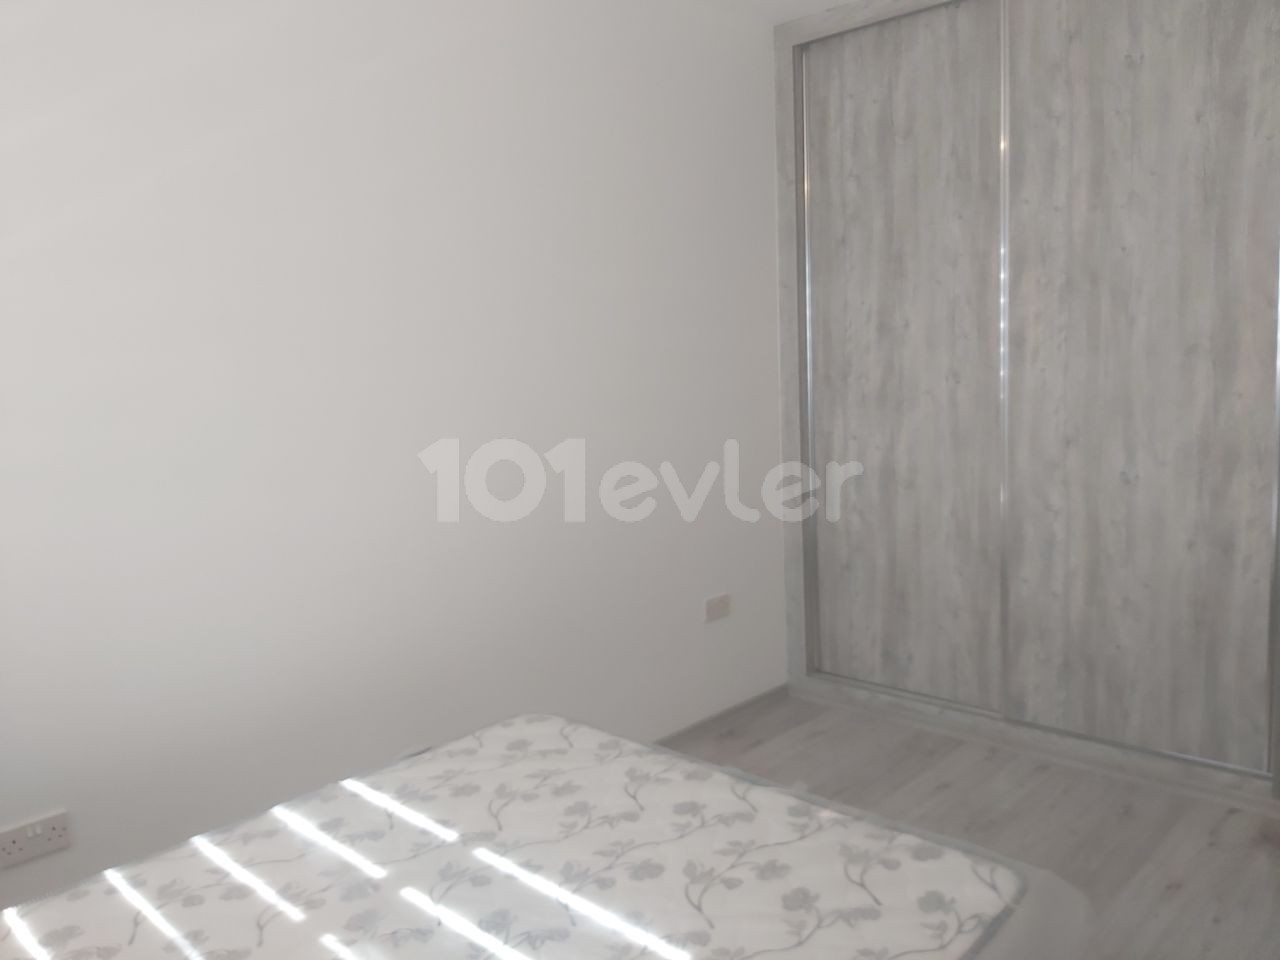 No more crowded apartments!! 2+1 fully furnished flat with ground floor garden for rent in Aşıklar Hill, the most decent area of Gönyeli